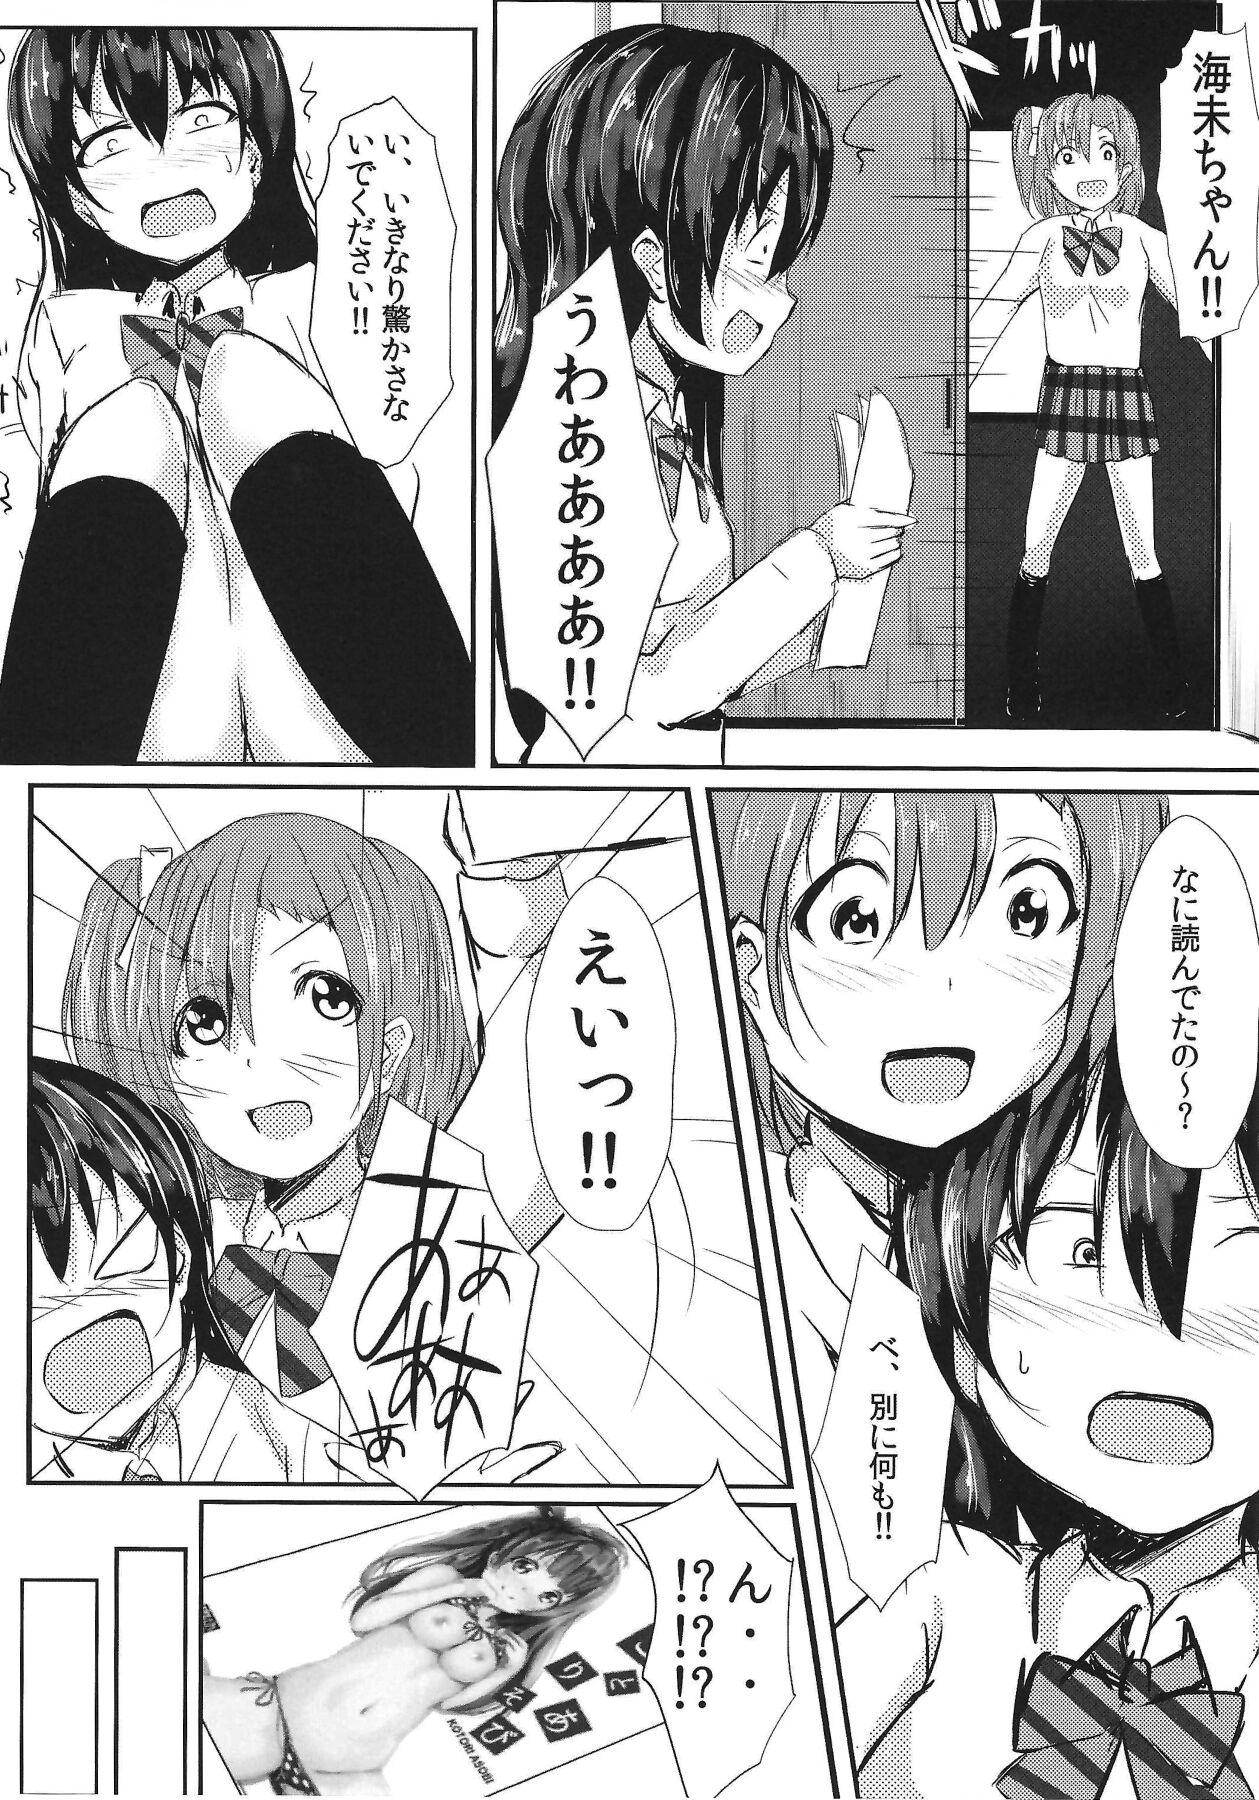 Pounded LOVE!LOVE!FESTIVAL!! 2 - Love live Clothed - Page 4